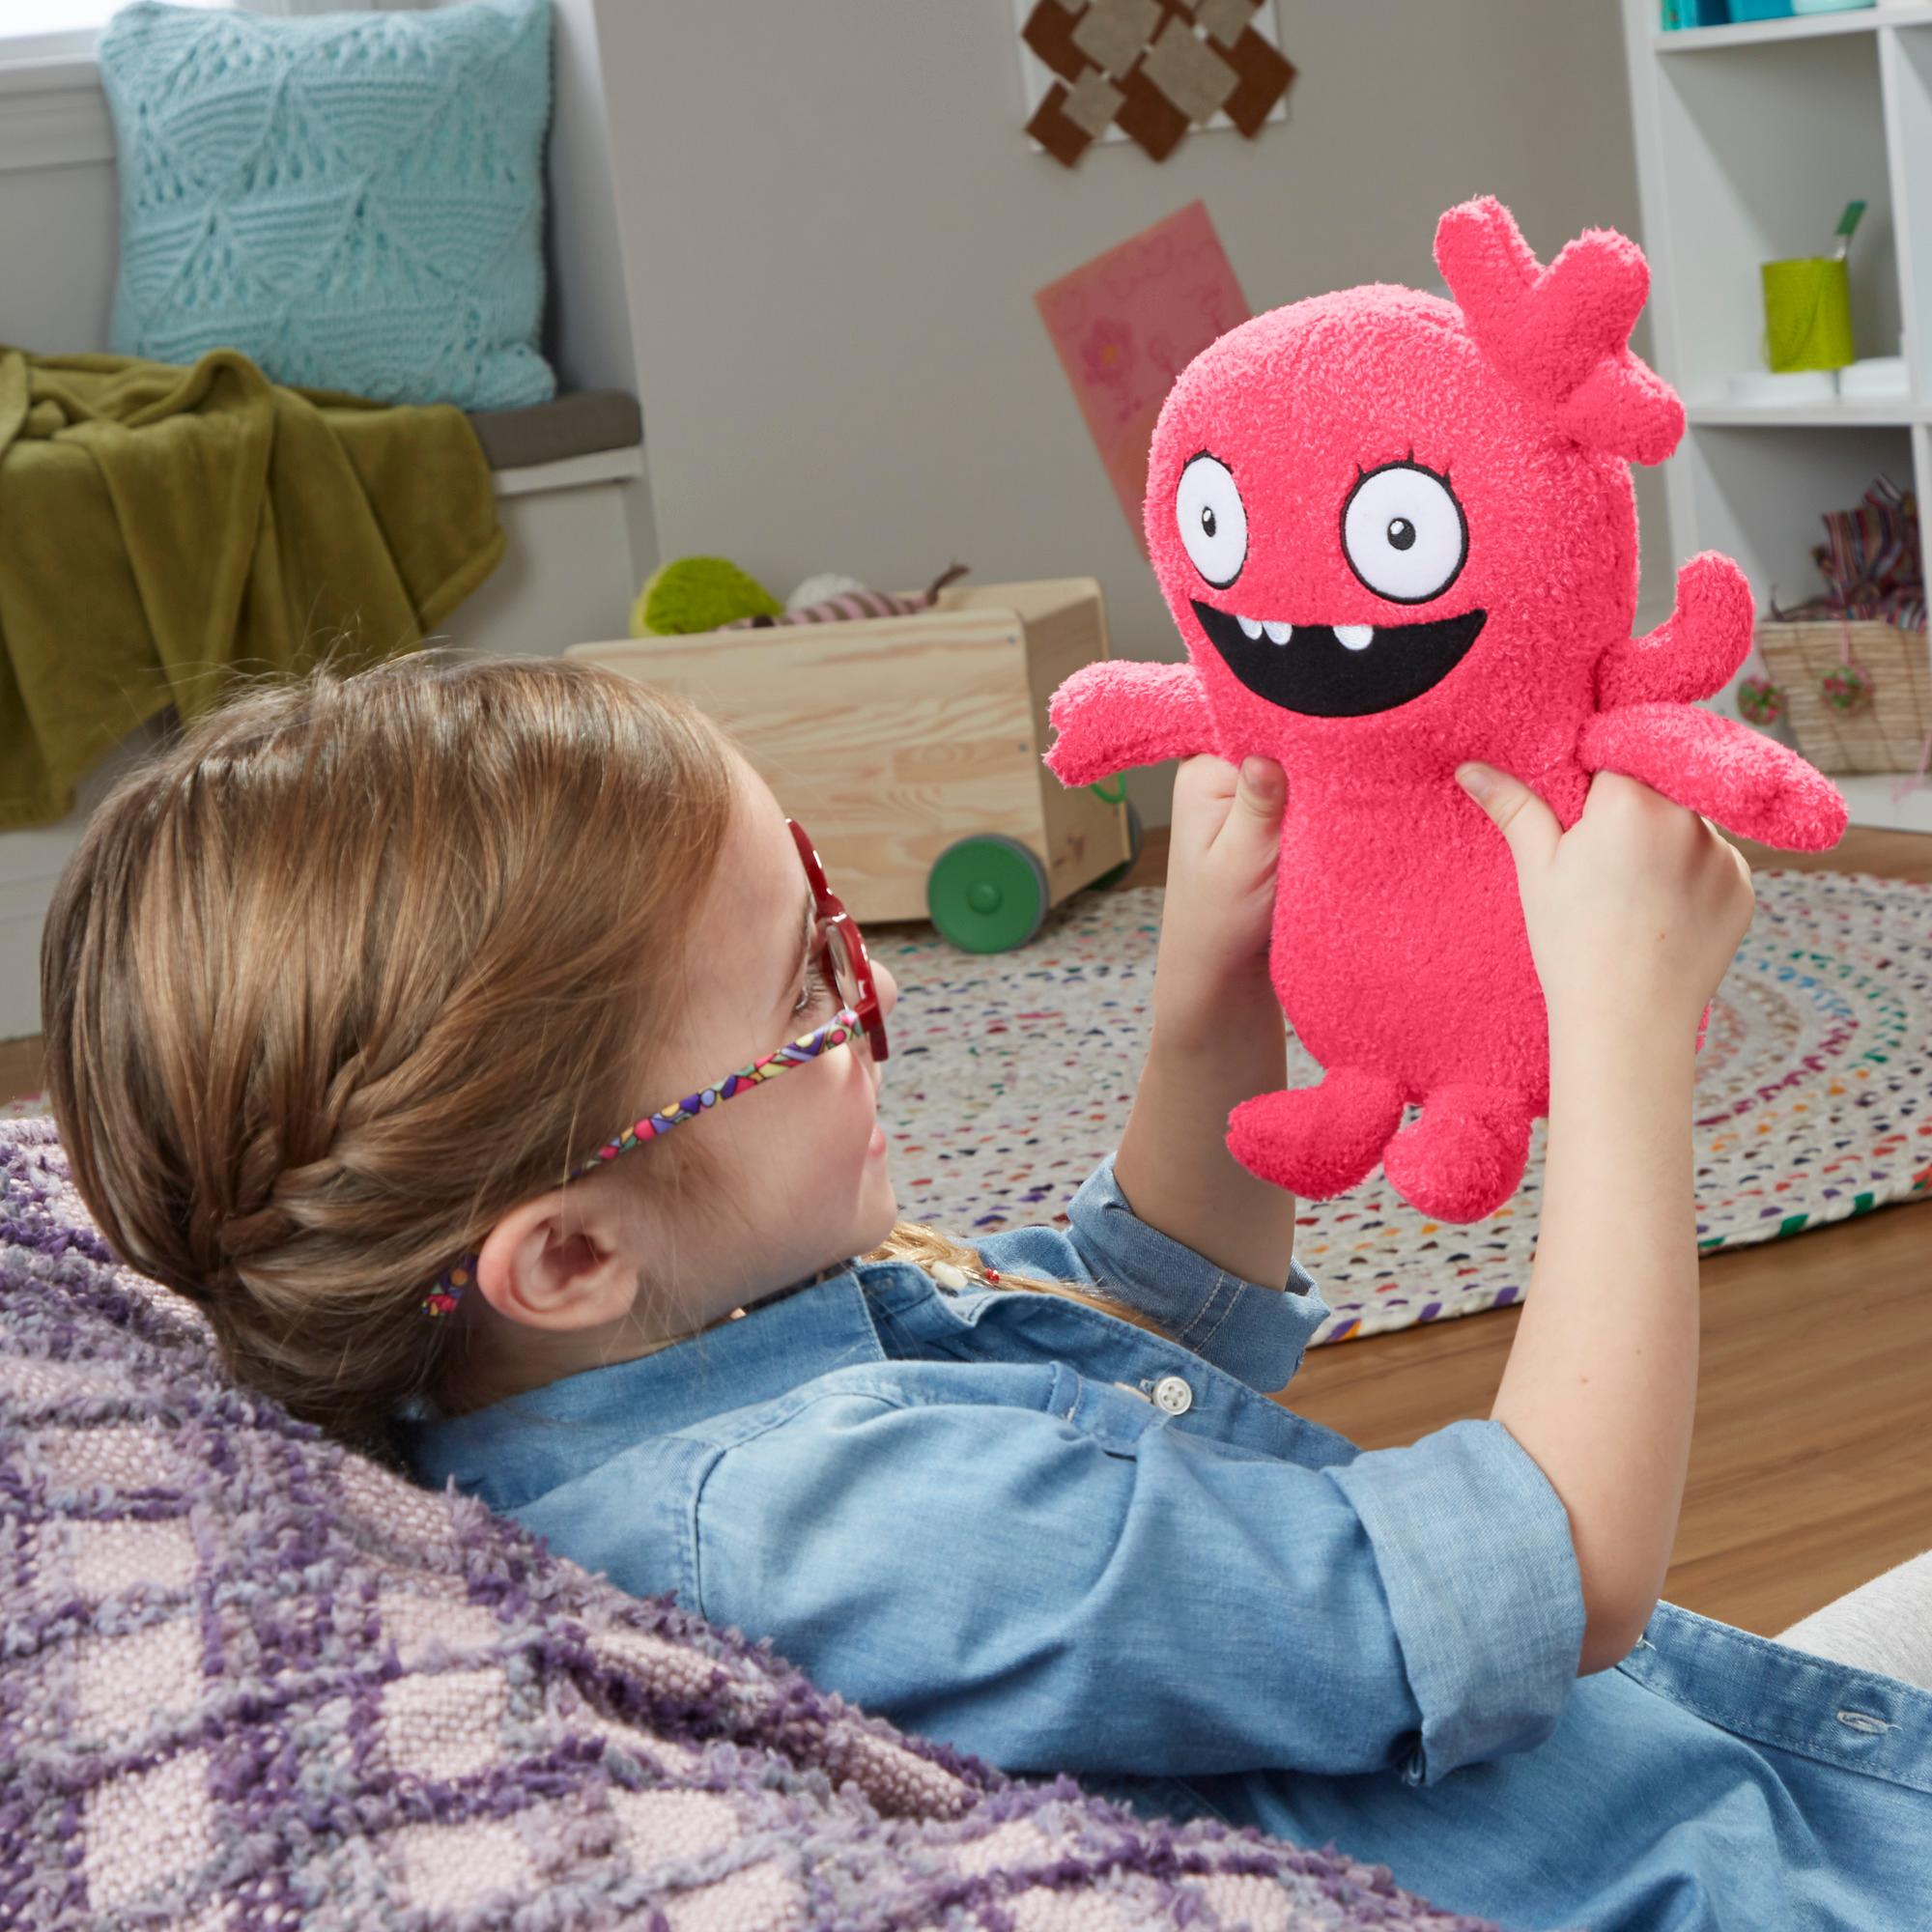 UglyDolls Feature Sounds Moxy Stuffed Plush Toy that Talks 11.5 inches tall! 